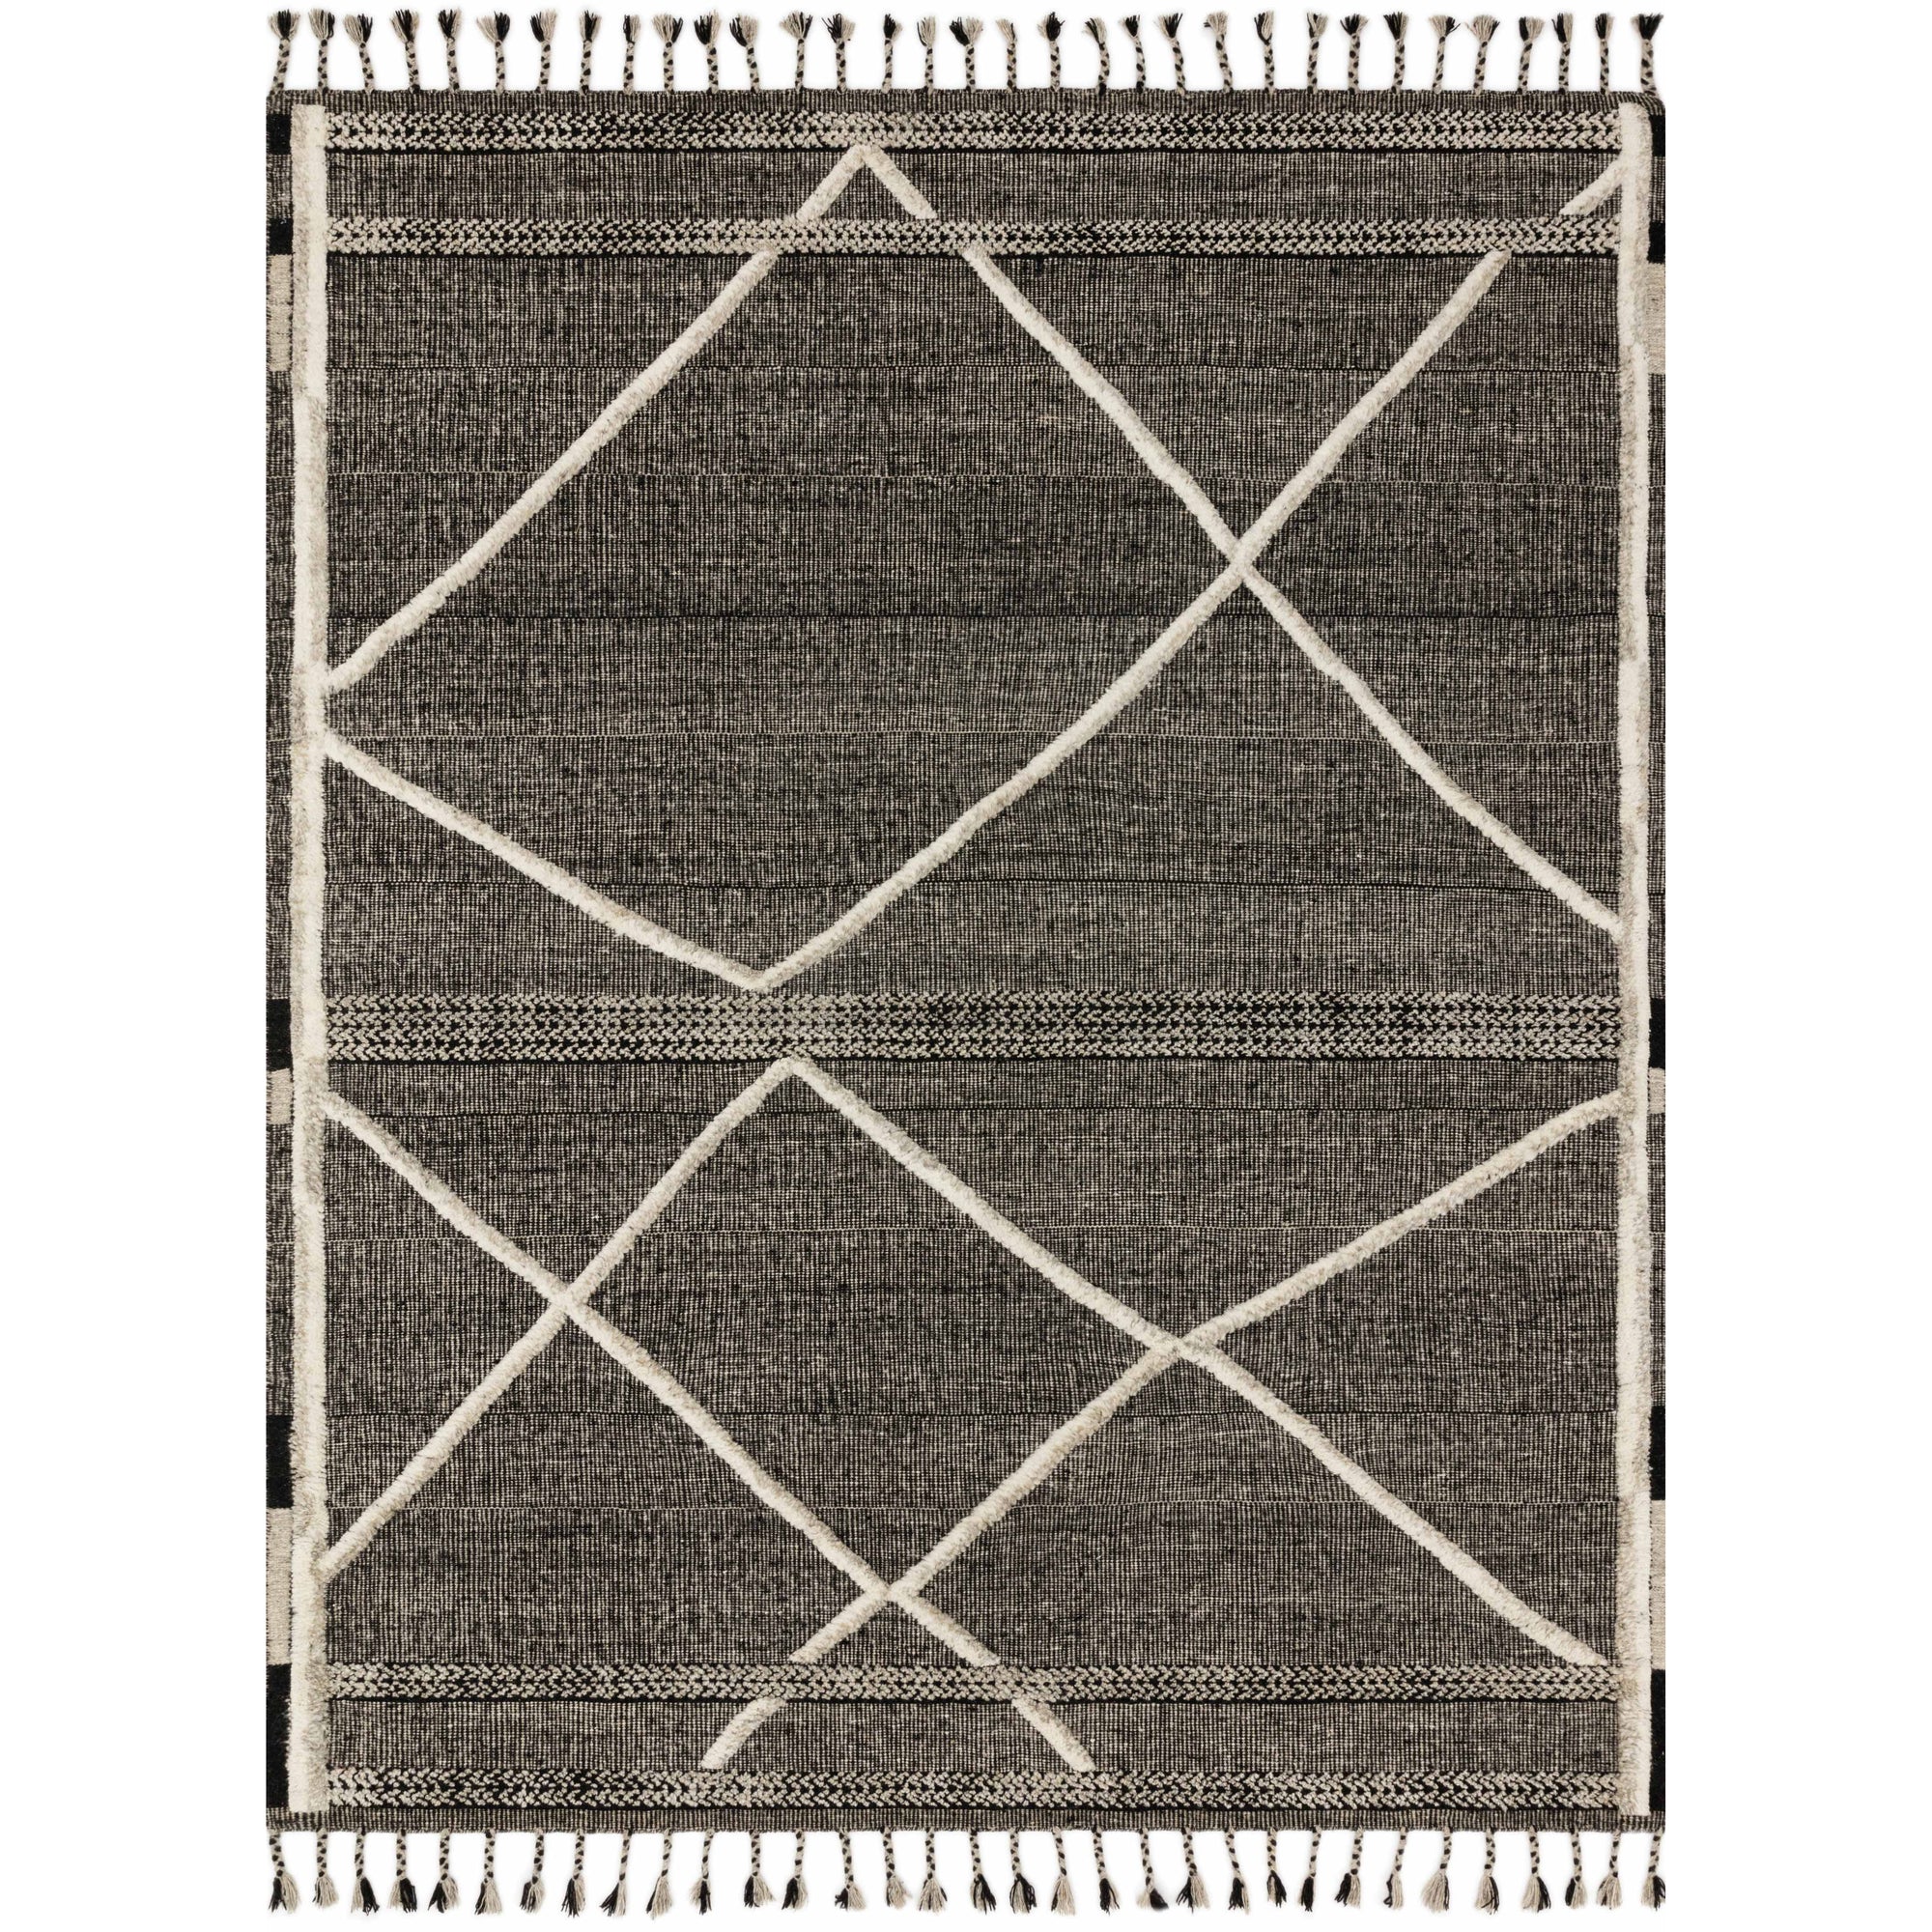 Rugs by Roo Loloi Iman Beige Charcoal Area Rug in size 18" x 18" Sample